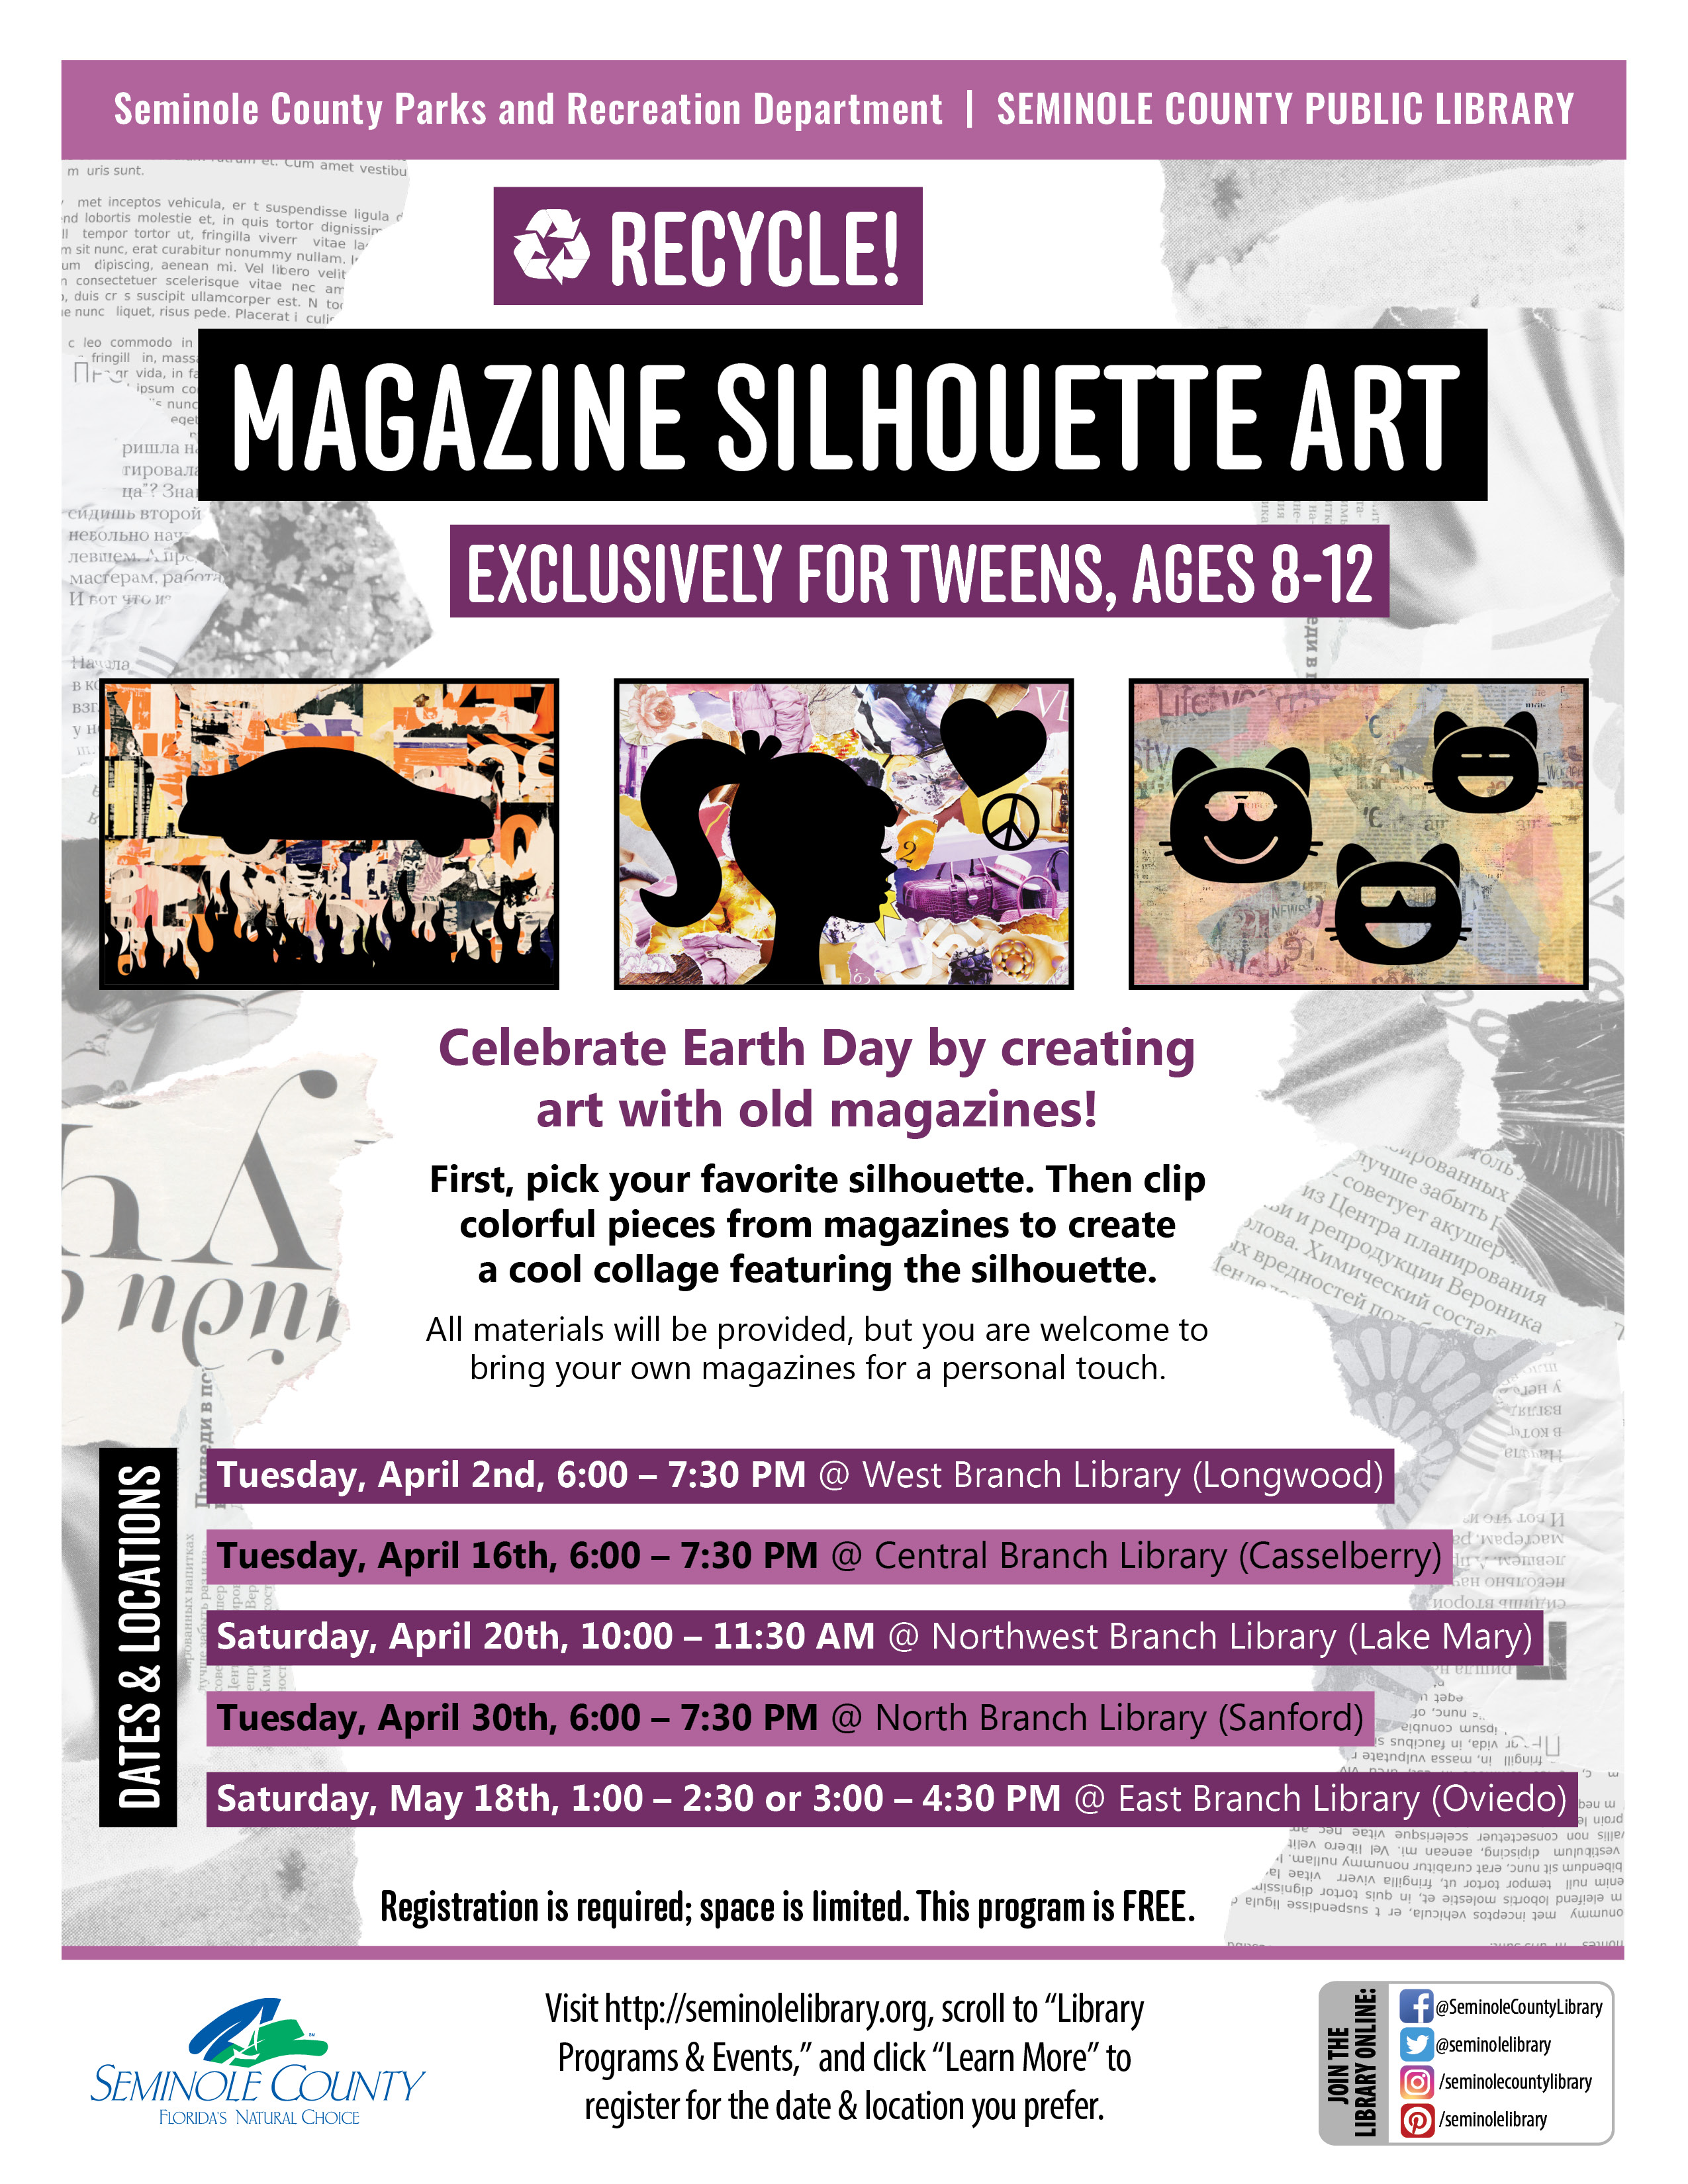 Recycle - Magazine Silhouette Art for Tweens - All Branches